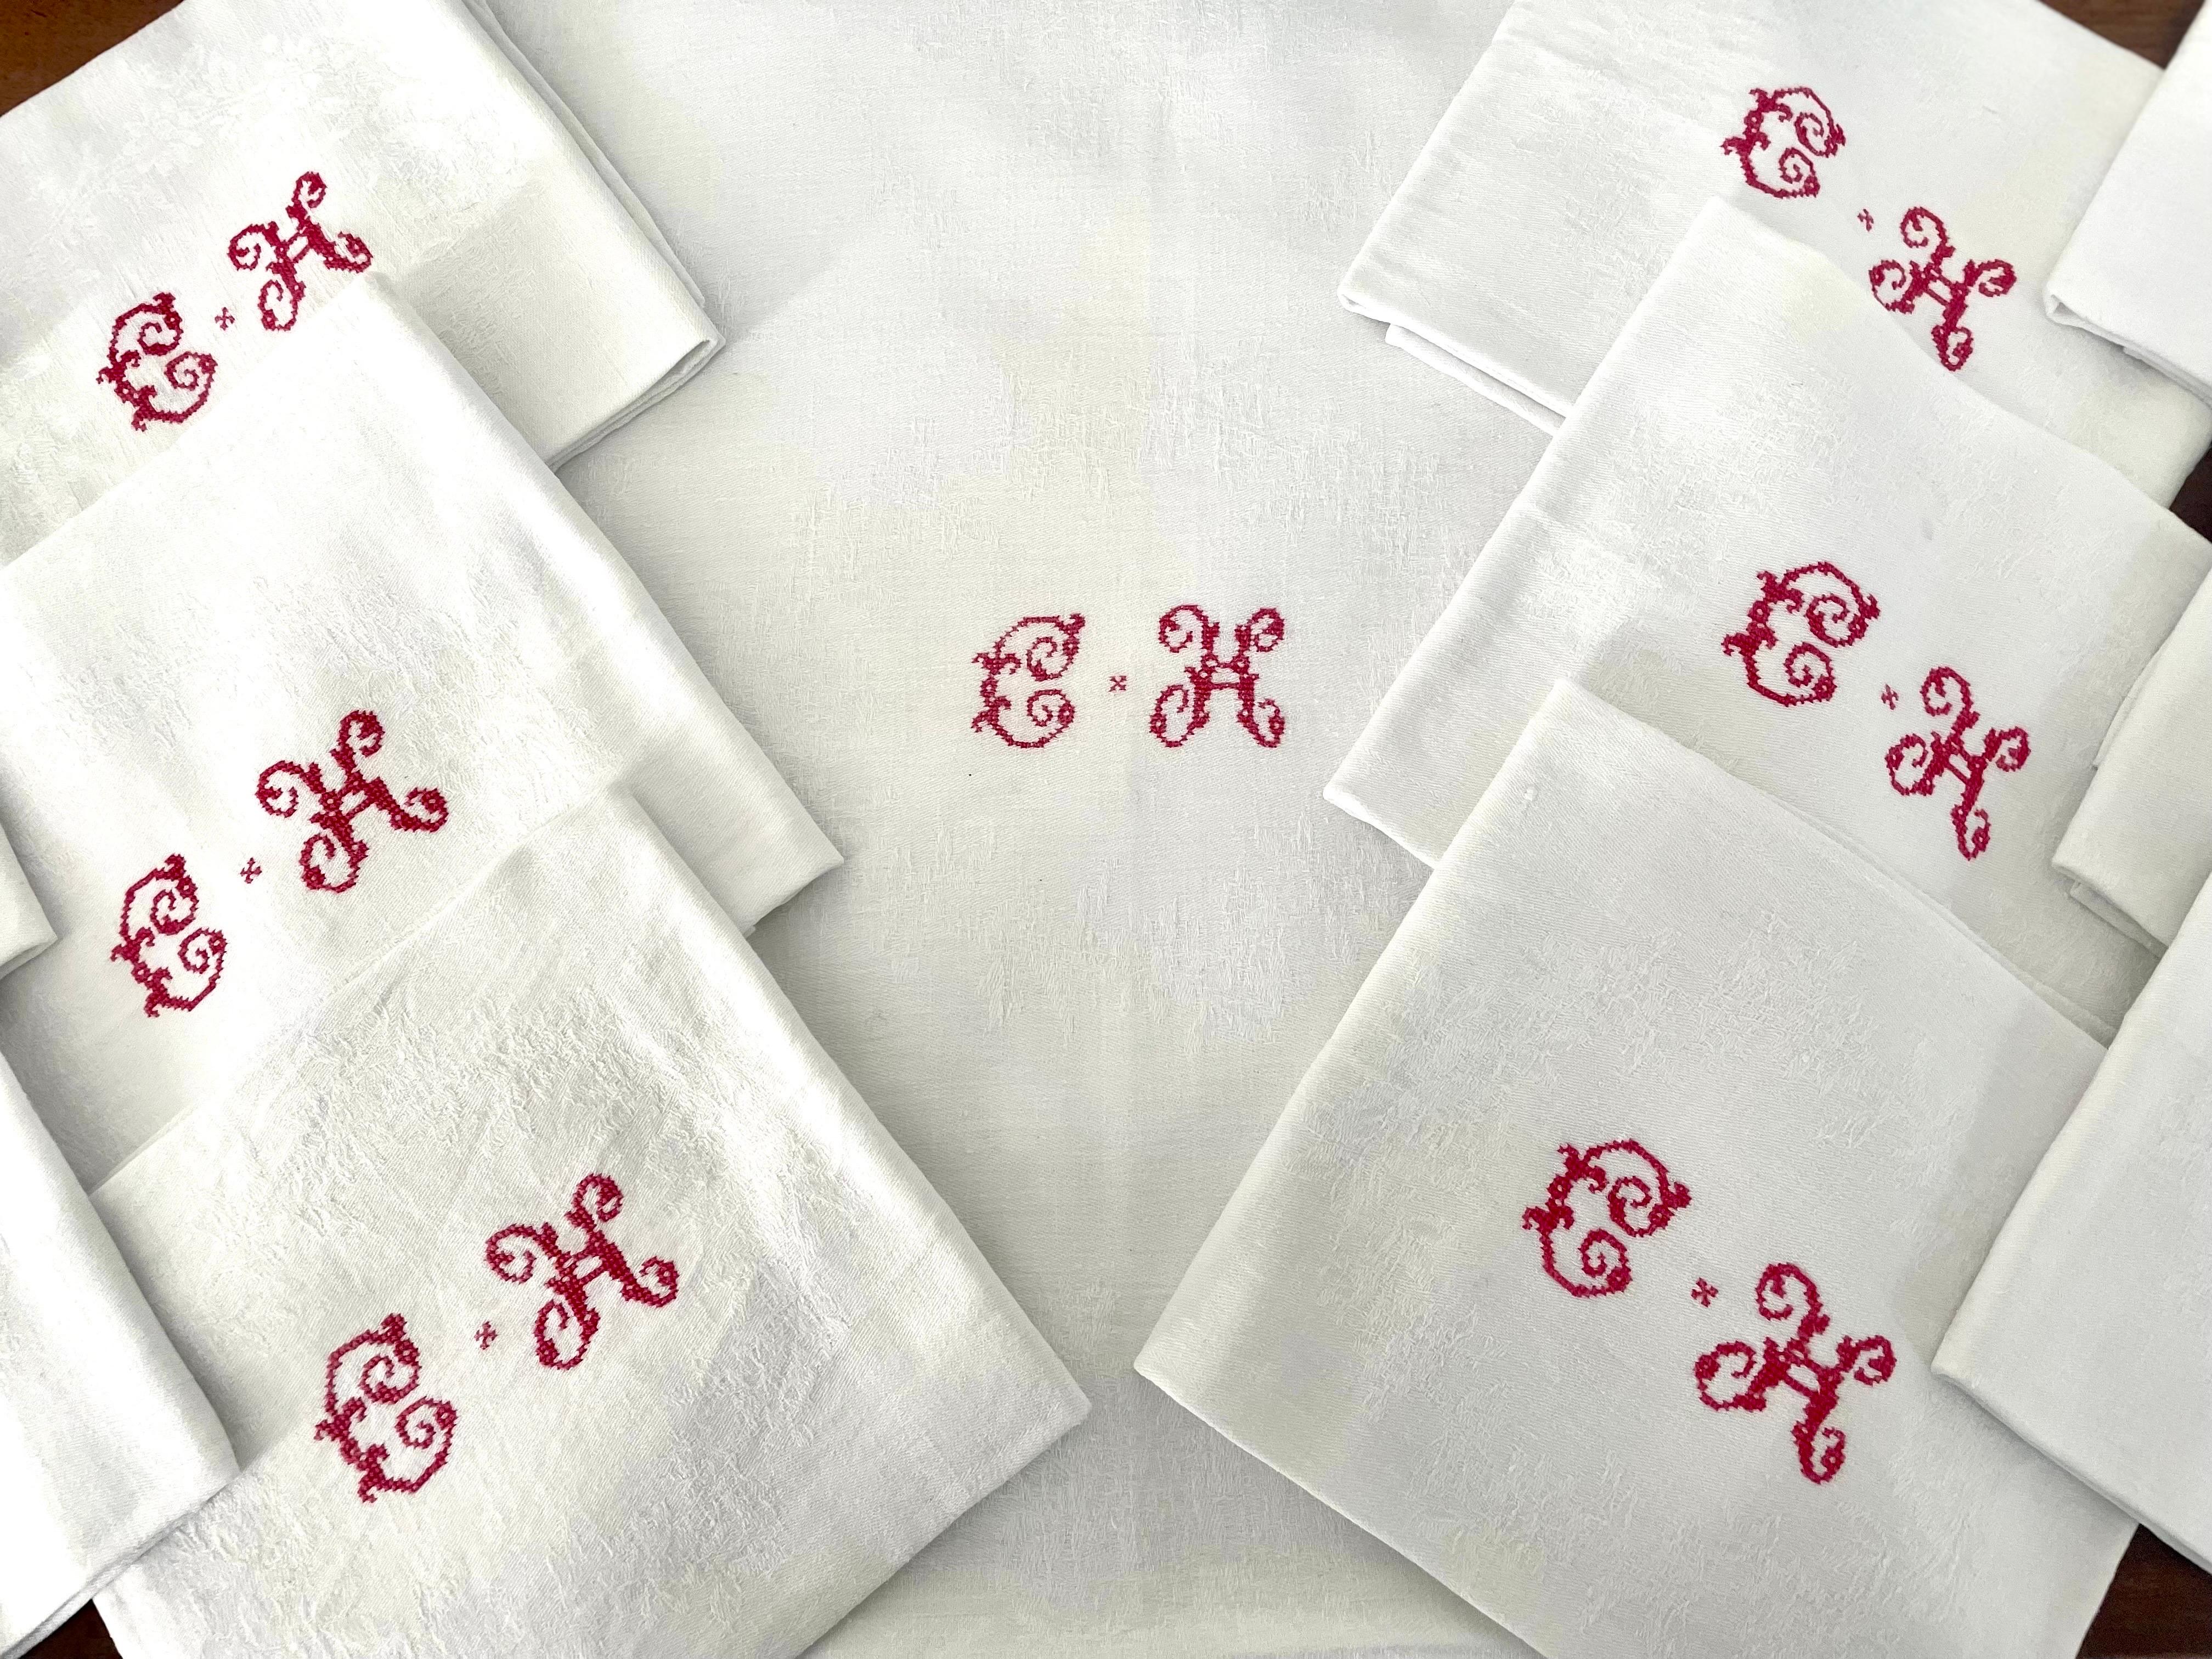 Very nice set of old linen from the end of the 19th, beginning of the 20th century including a tablecloth and its 12 matching napkins.
The tablecloth and napkins are very elegant and refined. The set is monogrammed with the initials 